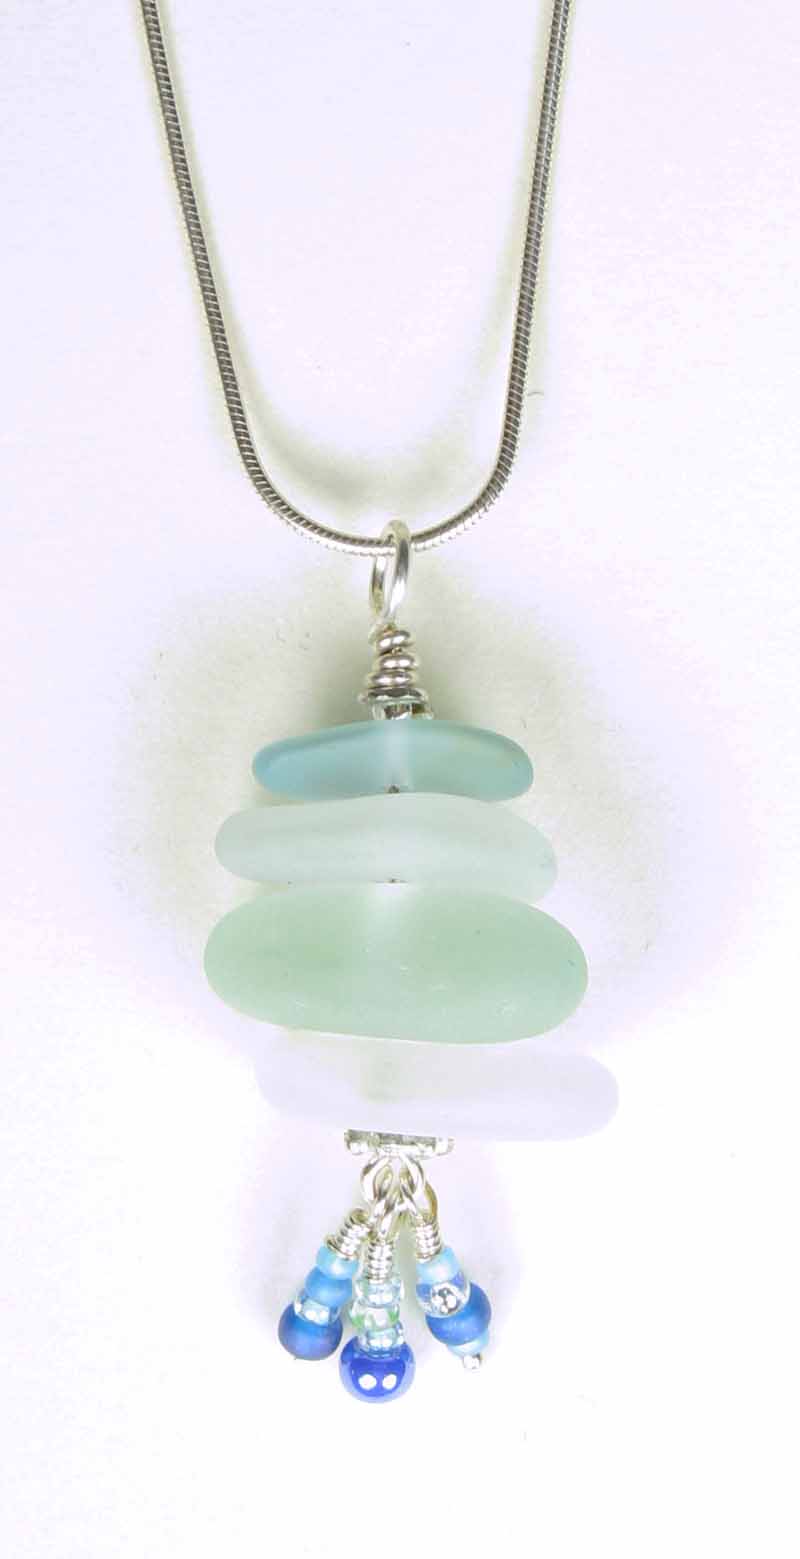 Stacked Beach Glass Necklace with dangles